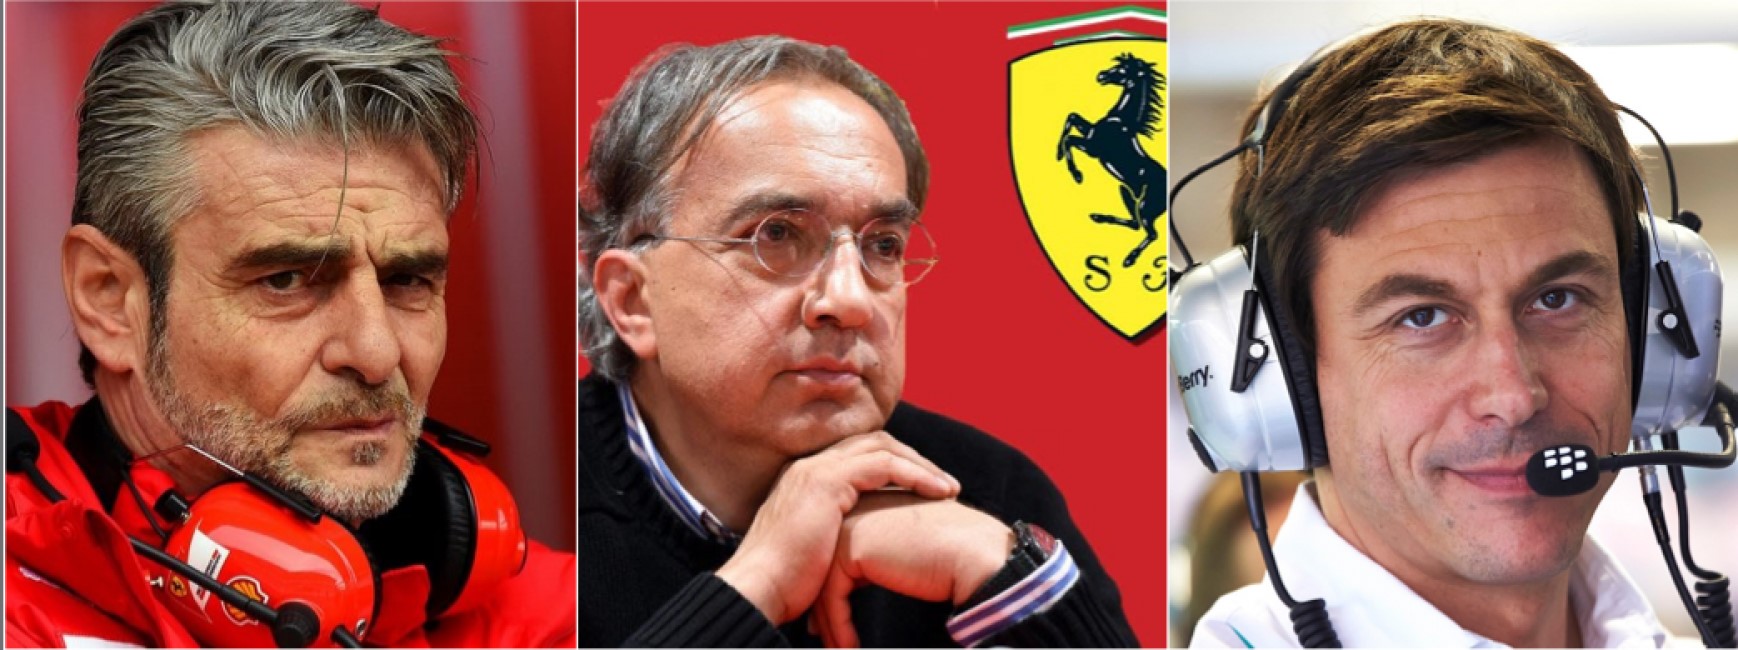 Arrivabene, Marchionne and Wolff. Marchione's departure leaves a void in F1